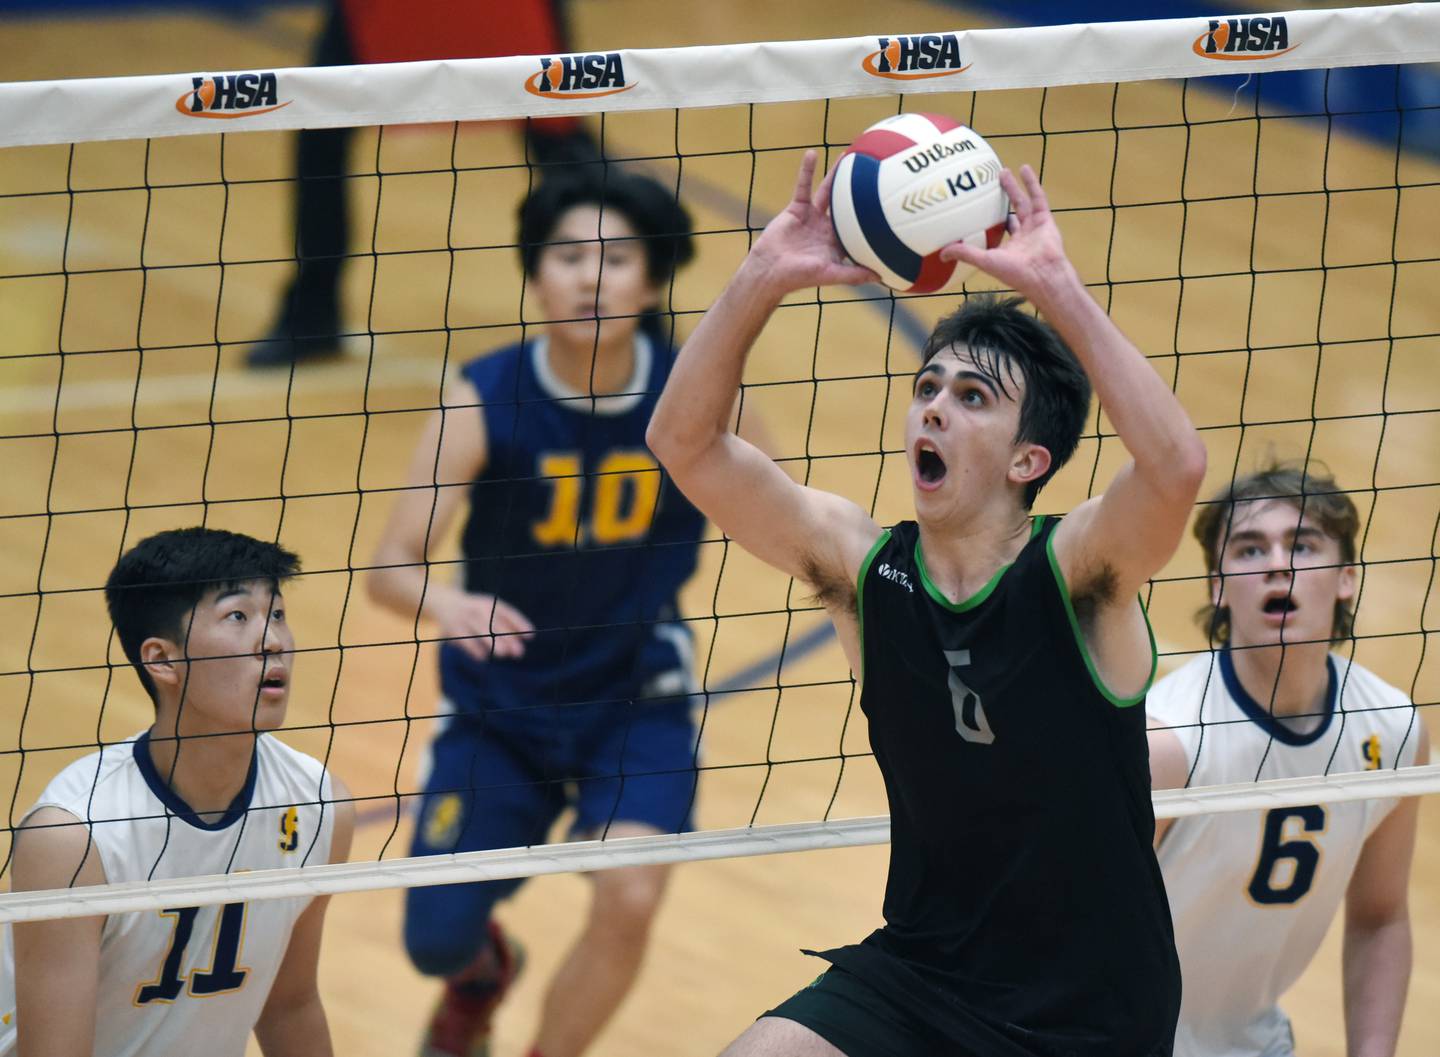 Glenbard West’s Jack Anderson sets the ball in front of Glenbrook South's Jaki Erdene during the state quarterfinal match at Hoffman Estates High School Friday.